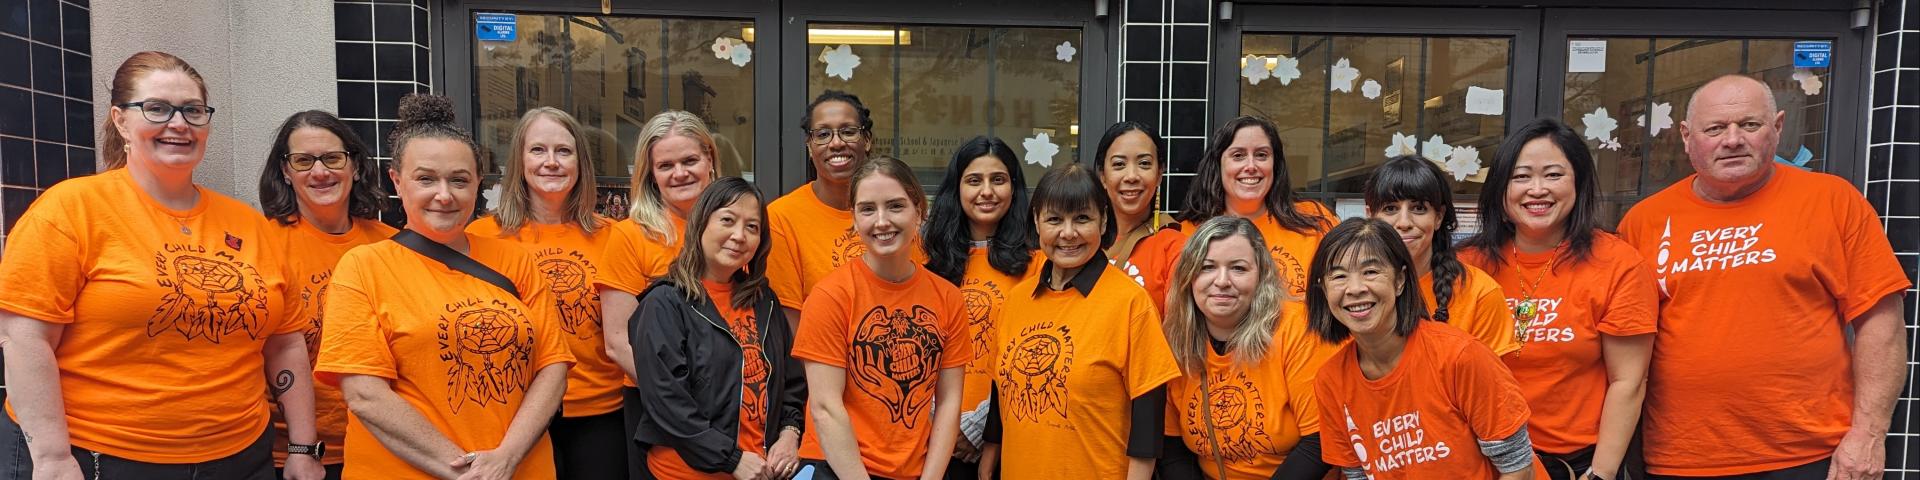 YWCA Staff wearing orange shirts in support of National Day for Truth and Reconciliation